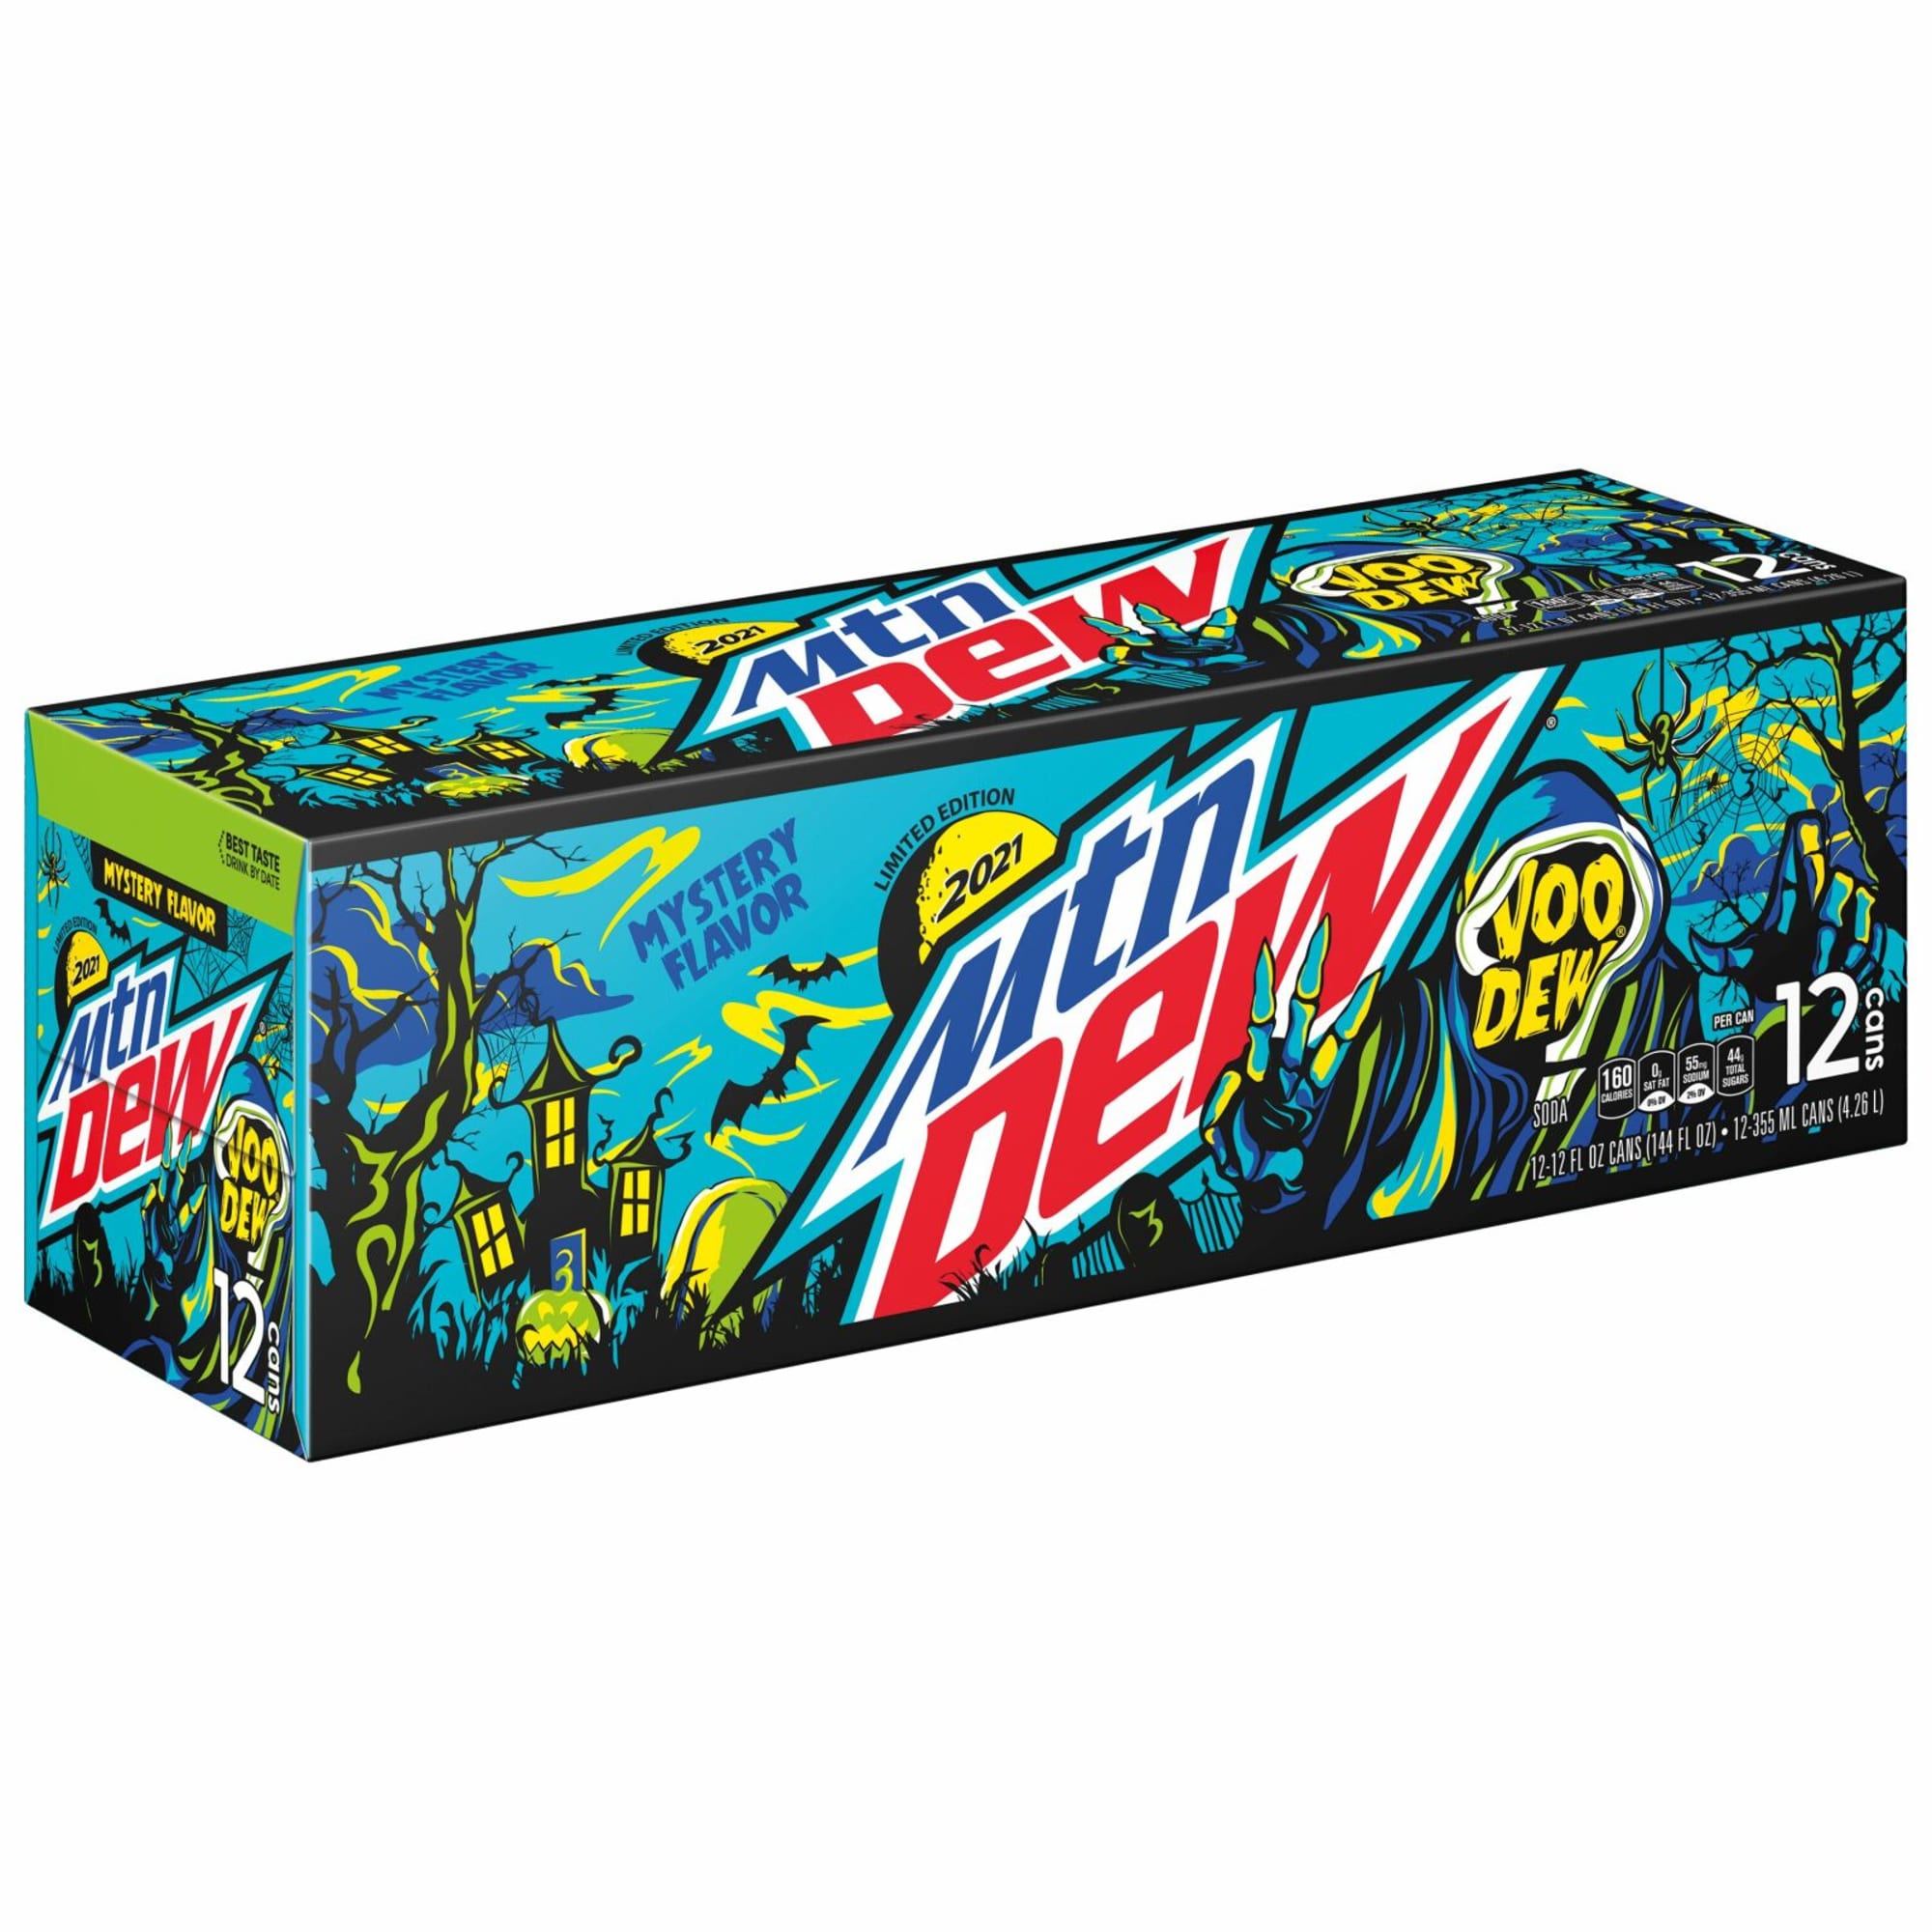 MTN DEW Halloween season means the return of the mystery VooDew